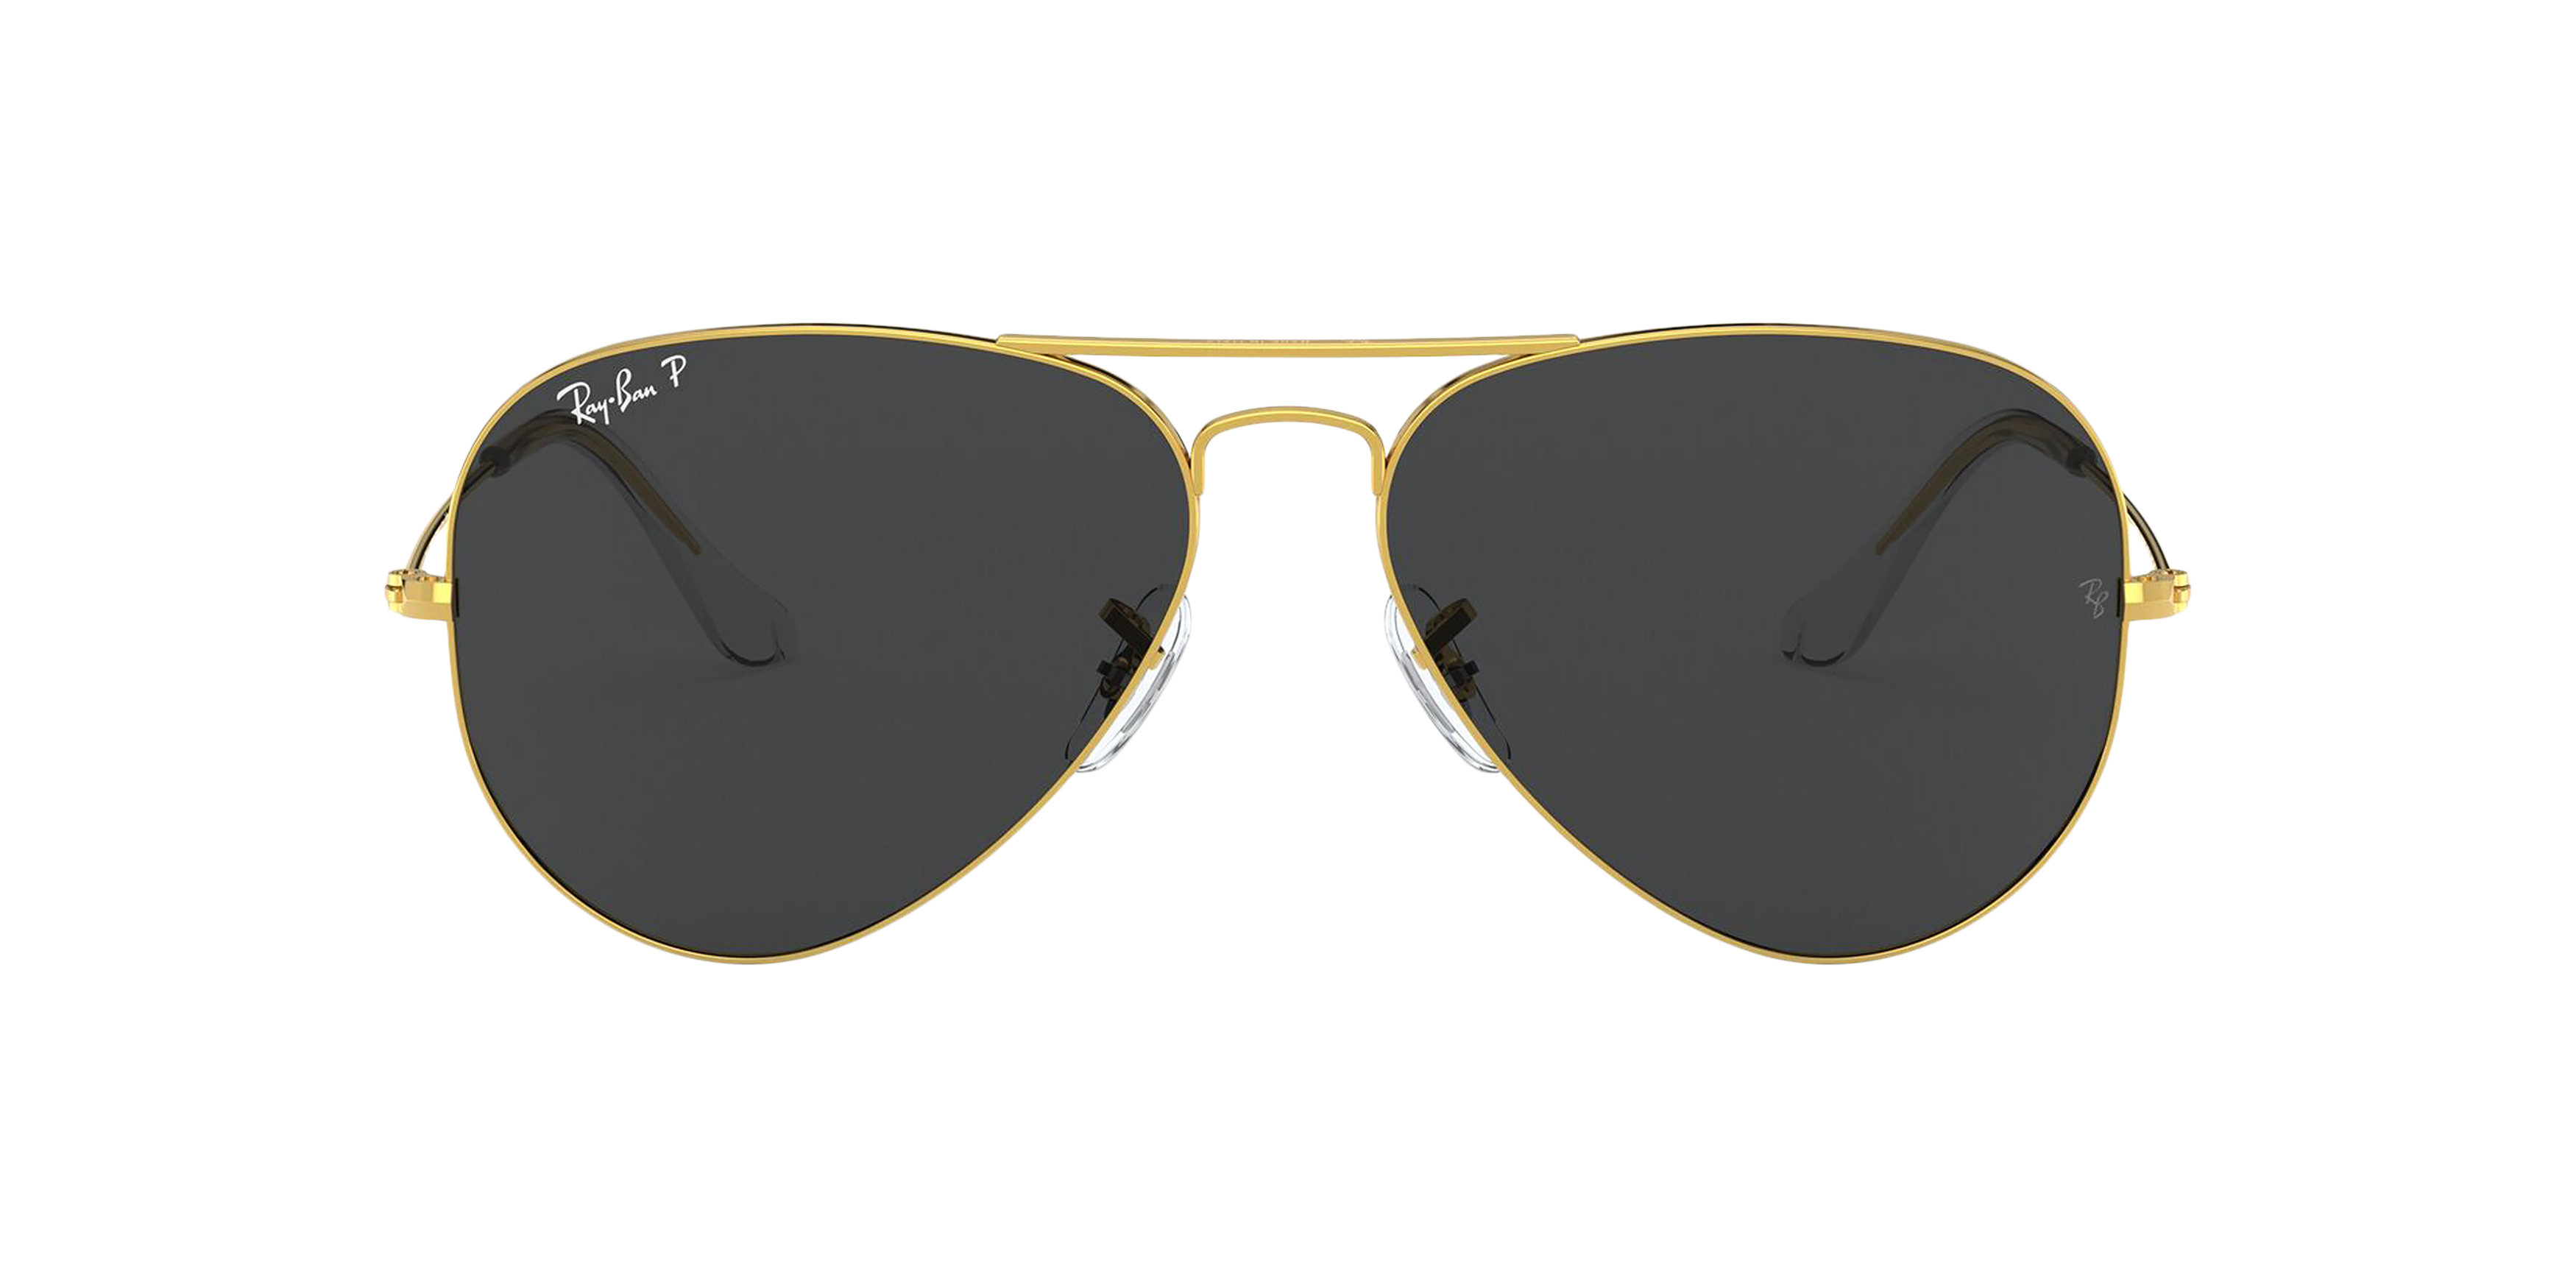 [products.image.front] Ray-Ban Aviator Classic RB3025 919648